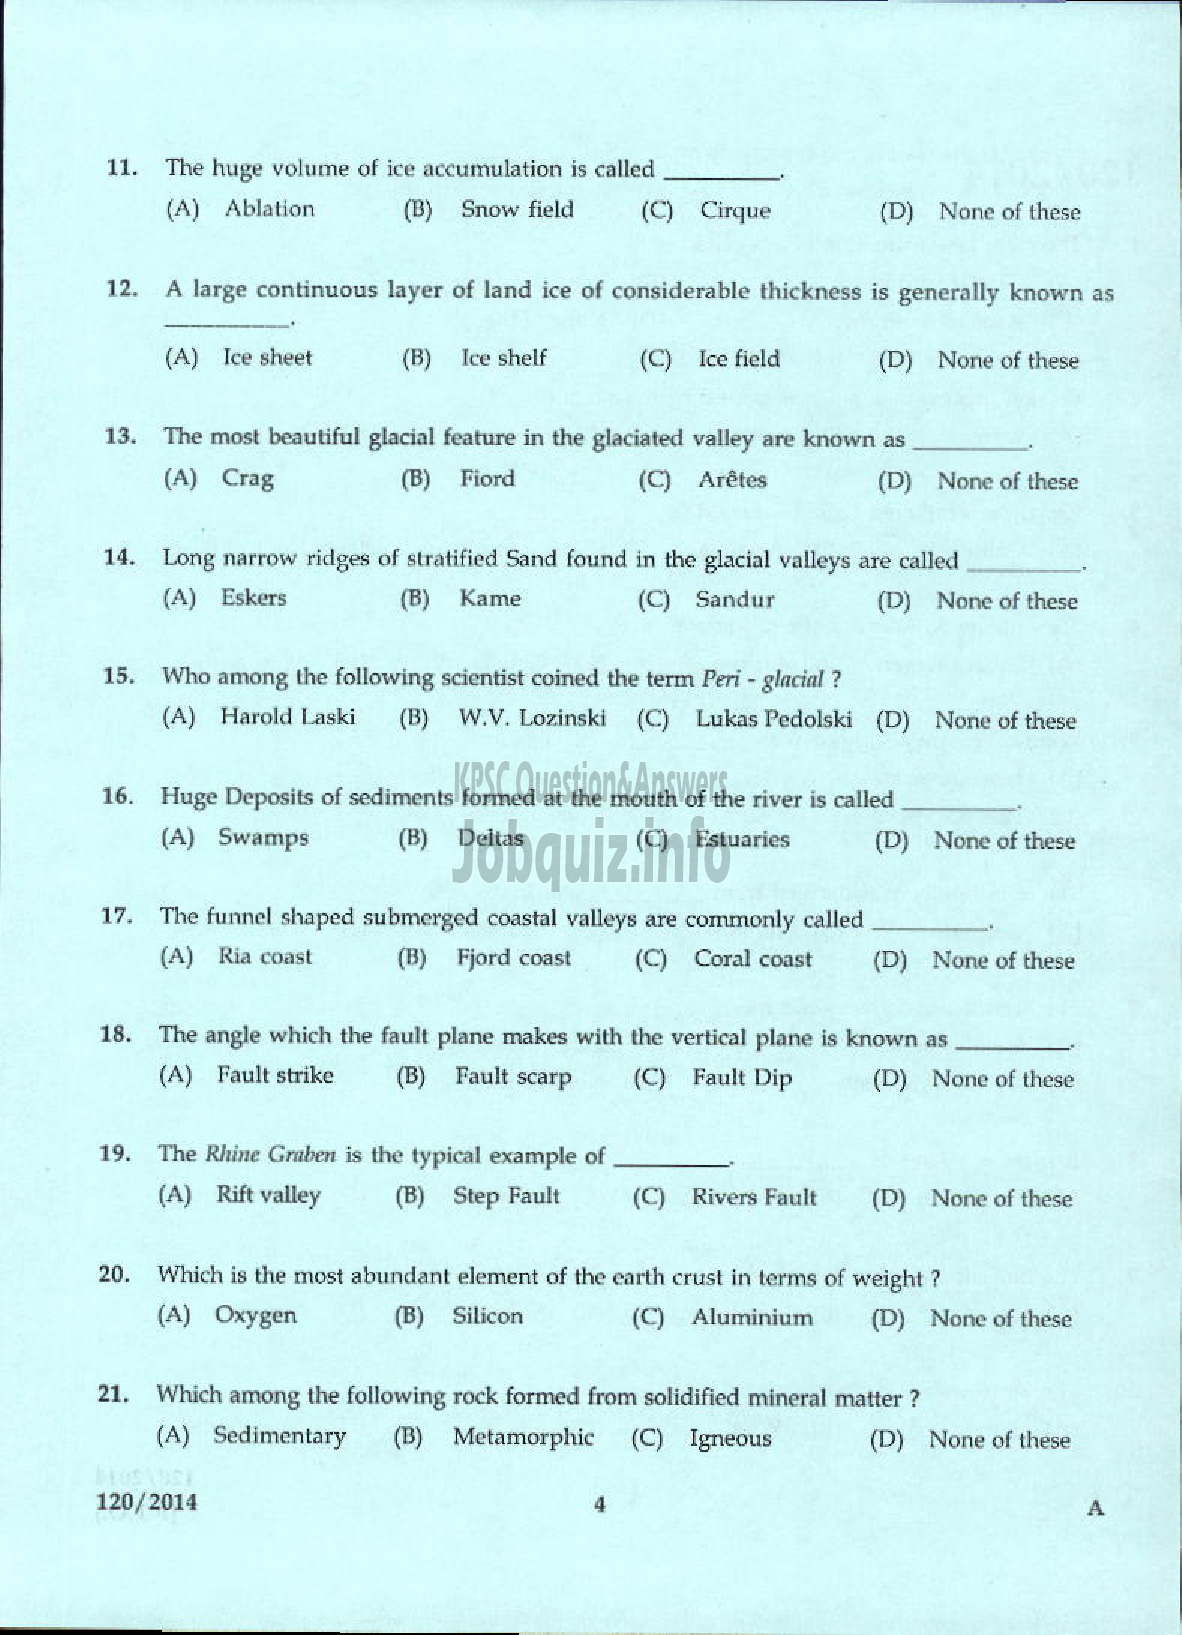 Kerala PSC Question Paper - LECTURER IN GEOGRAPHY KERALA COLLEGIATE EDUCATION-2